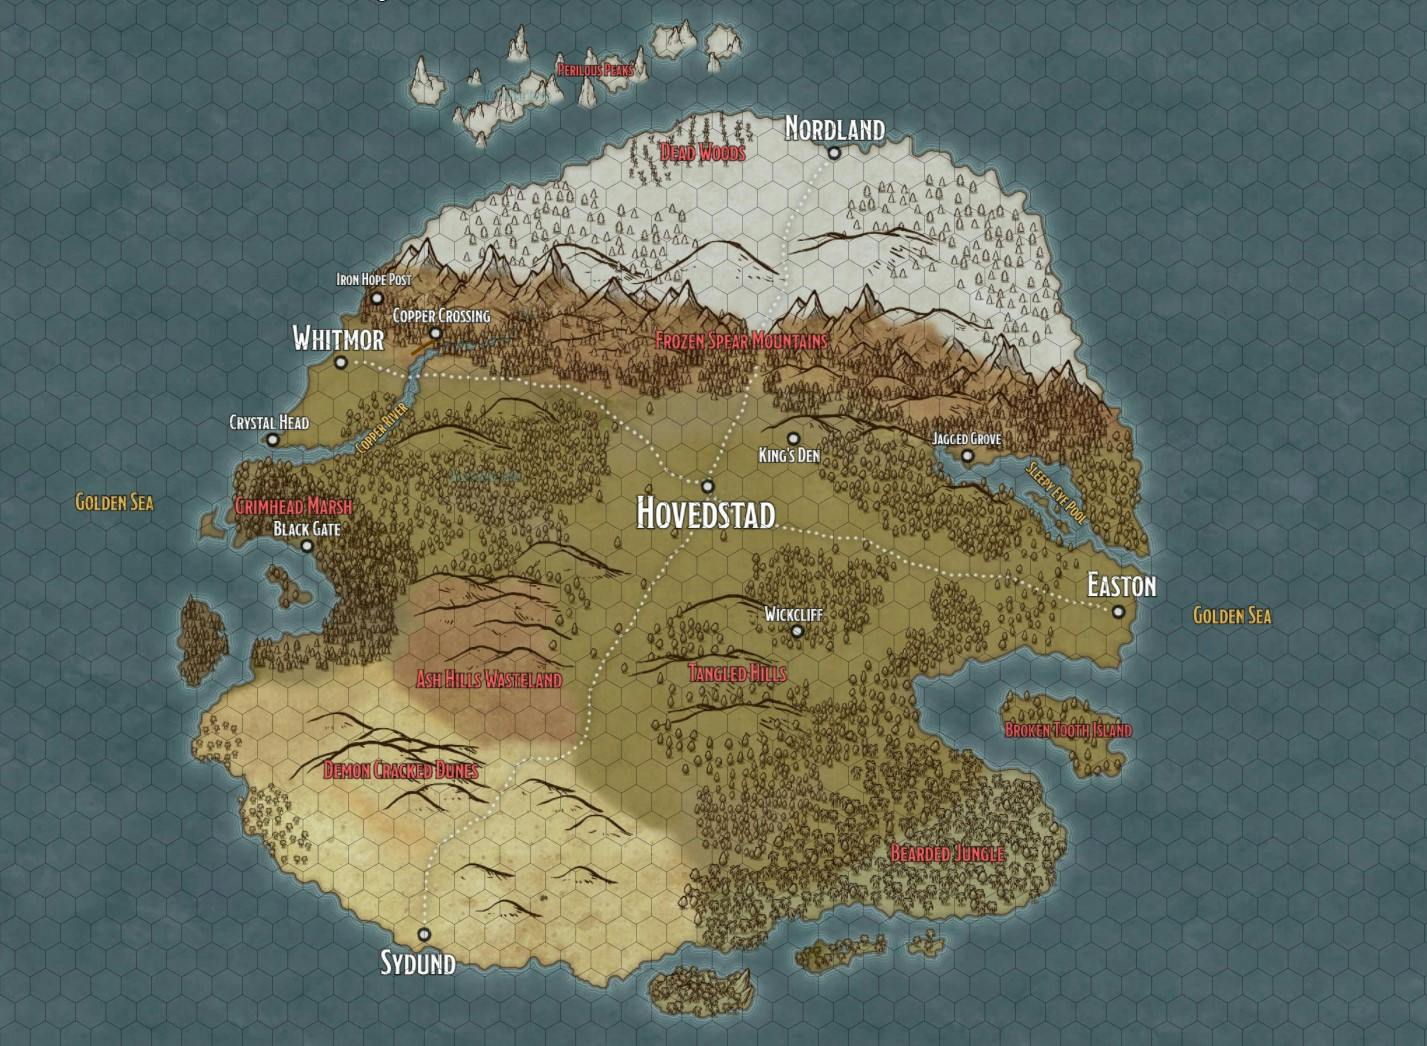 The Continent: Now Hiring Adventurers